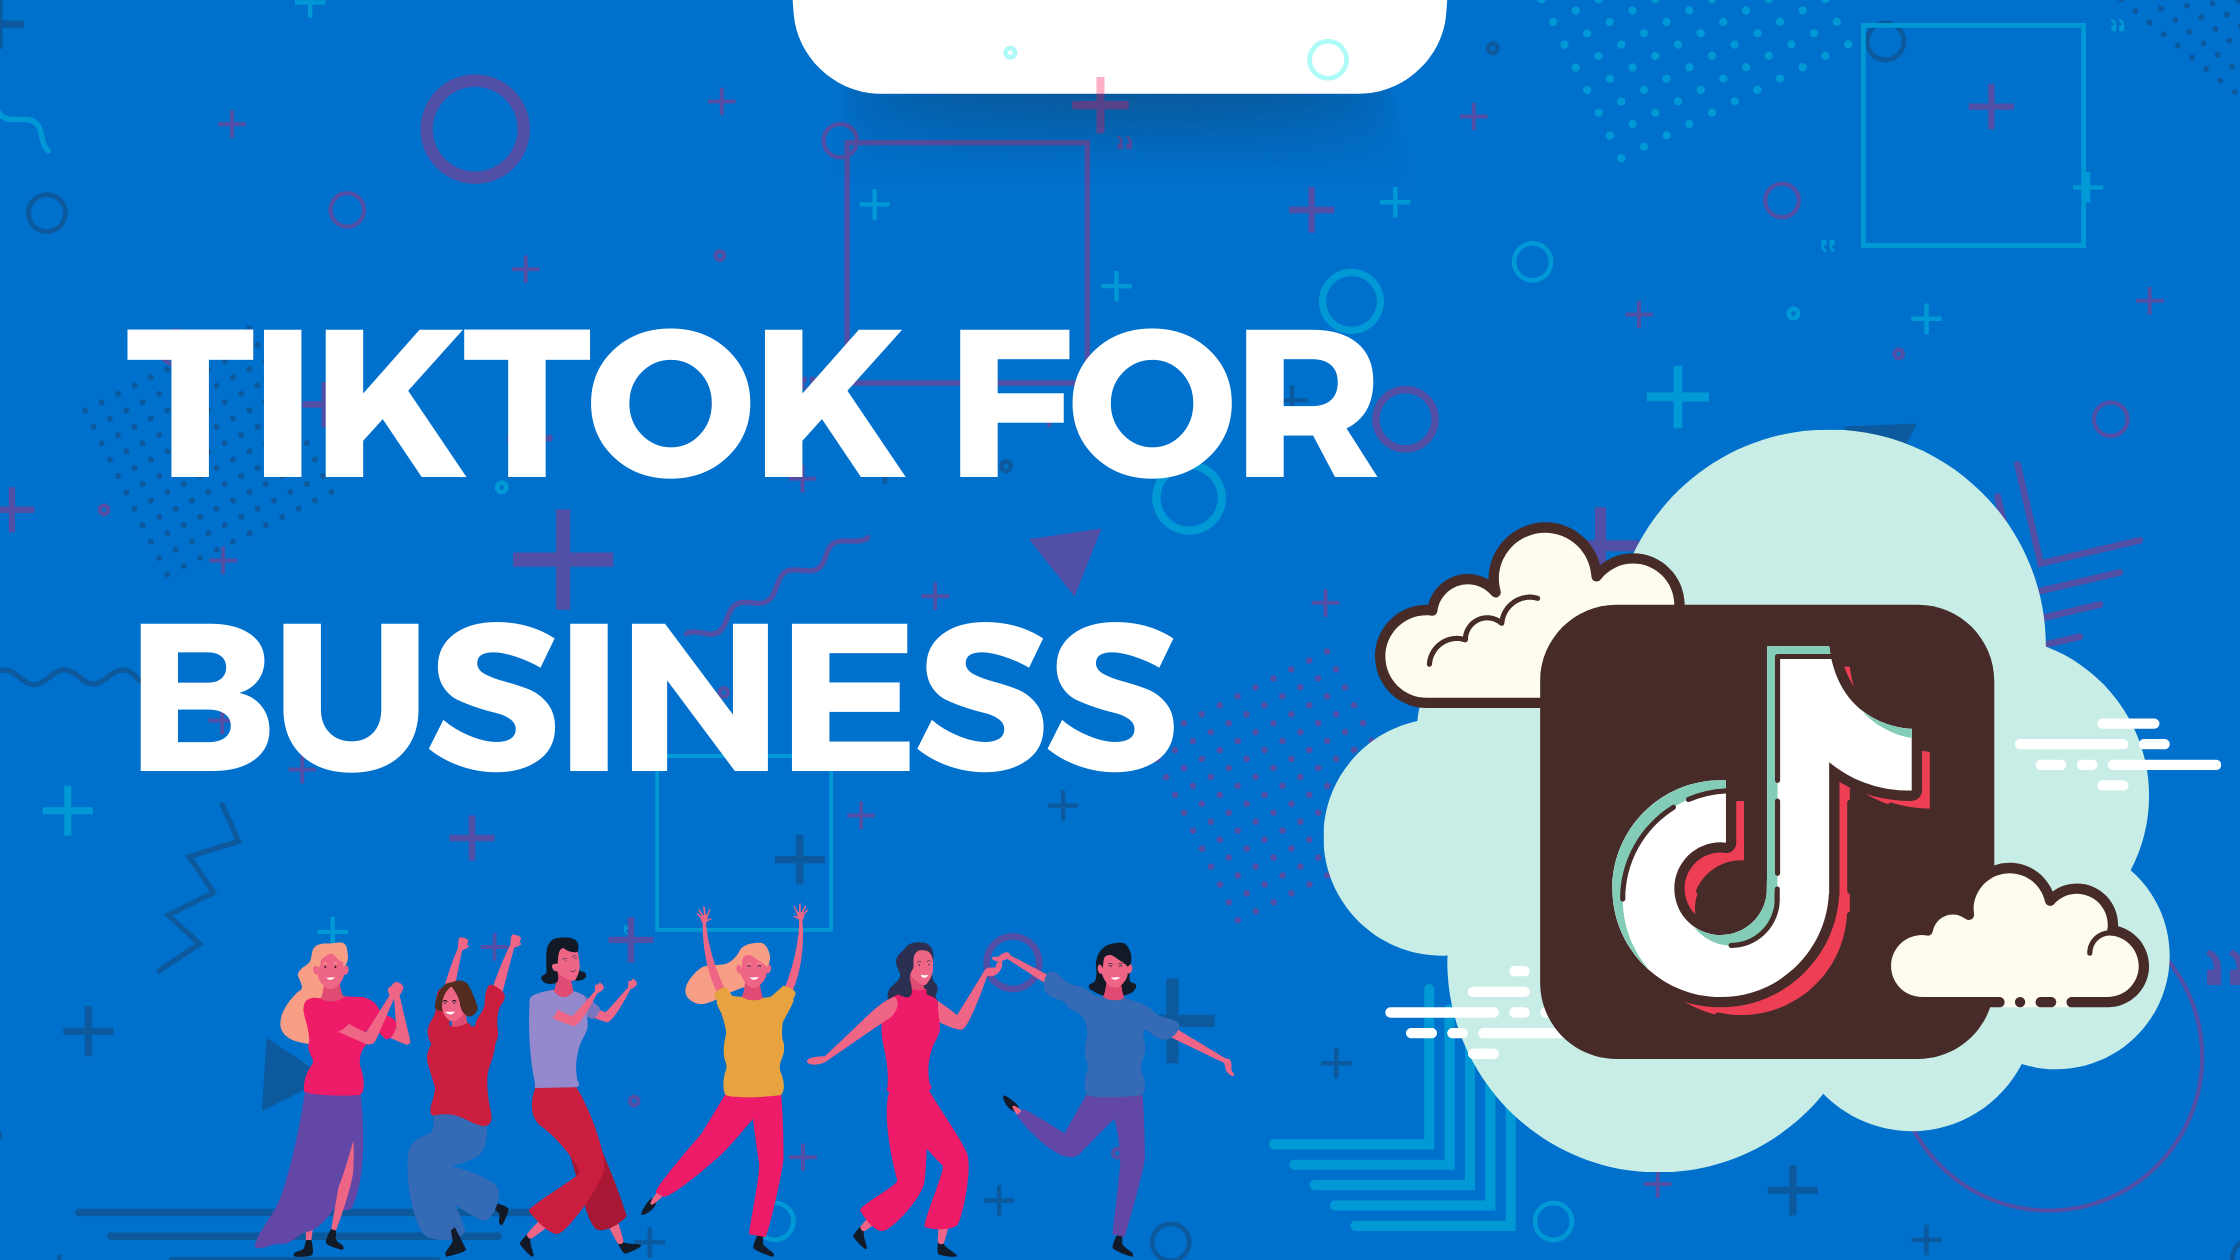 TikTok for Business: Comprehensive Guide You Need To Get Started Today